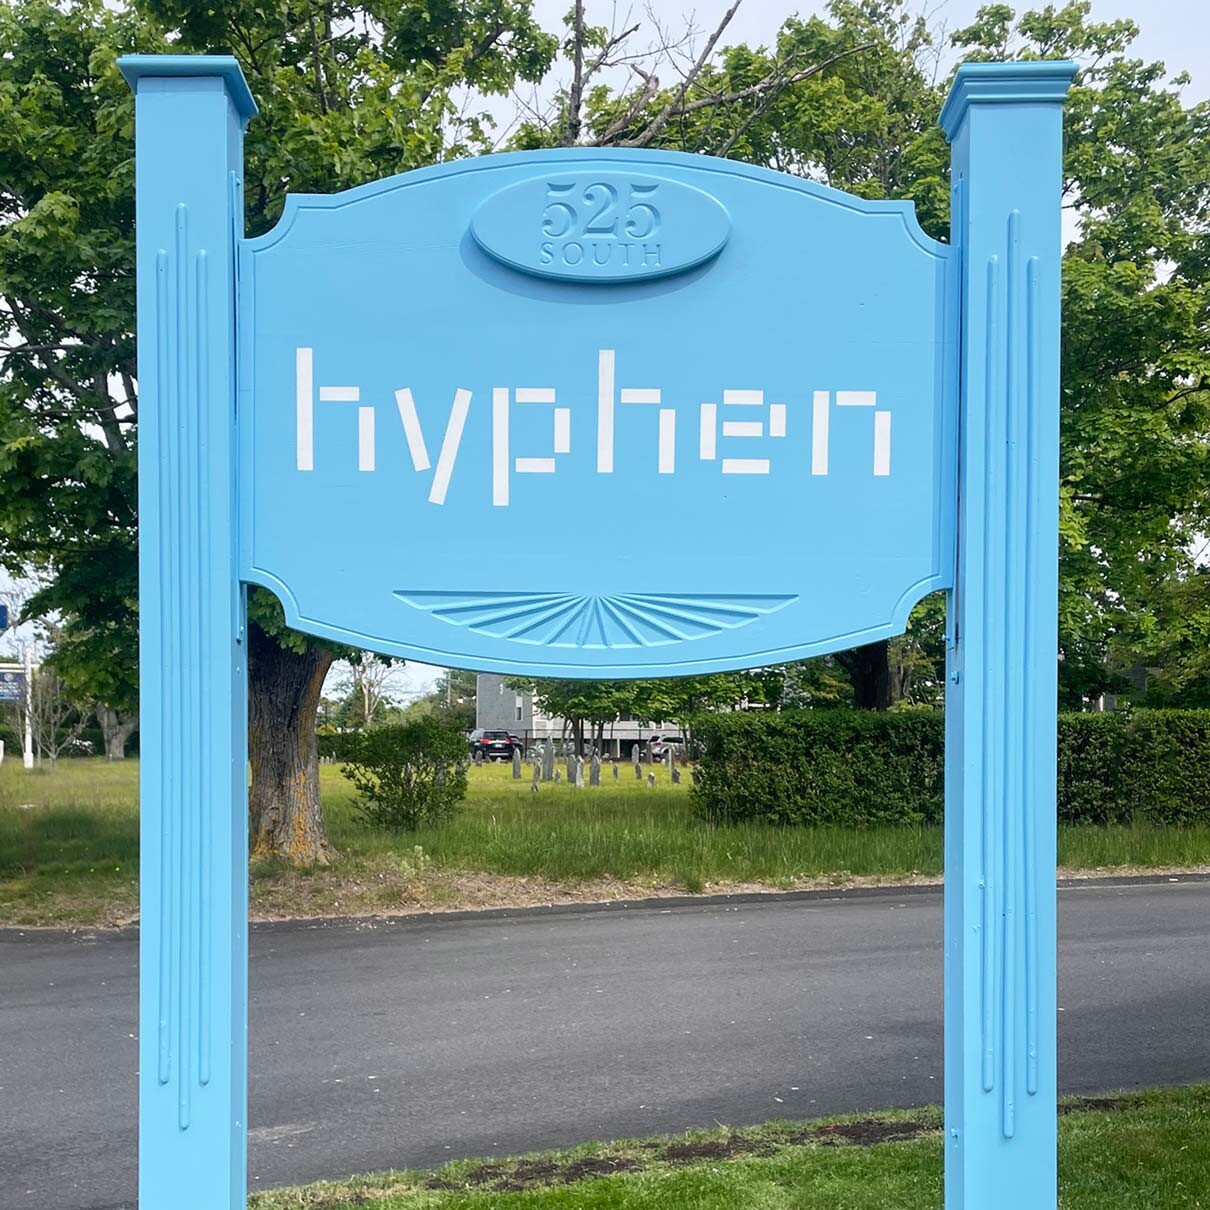 The exterior hyphen sign stands freshly painted